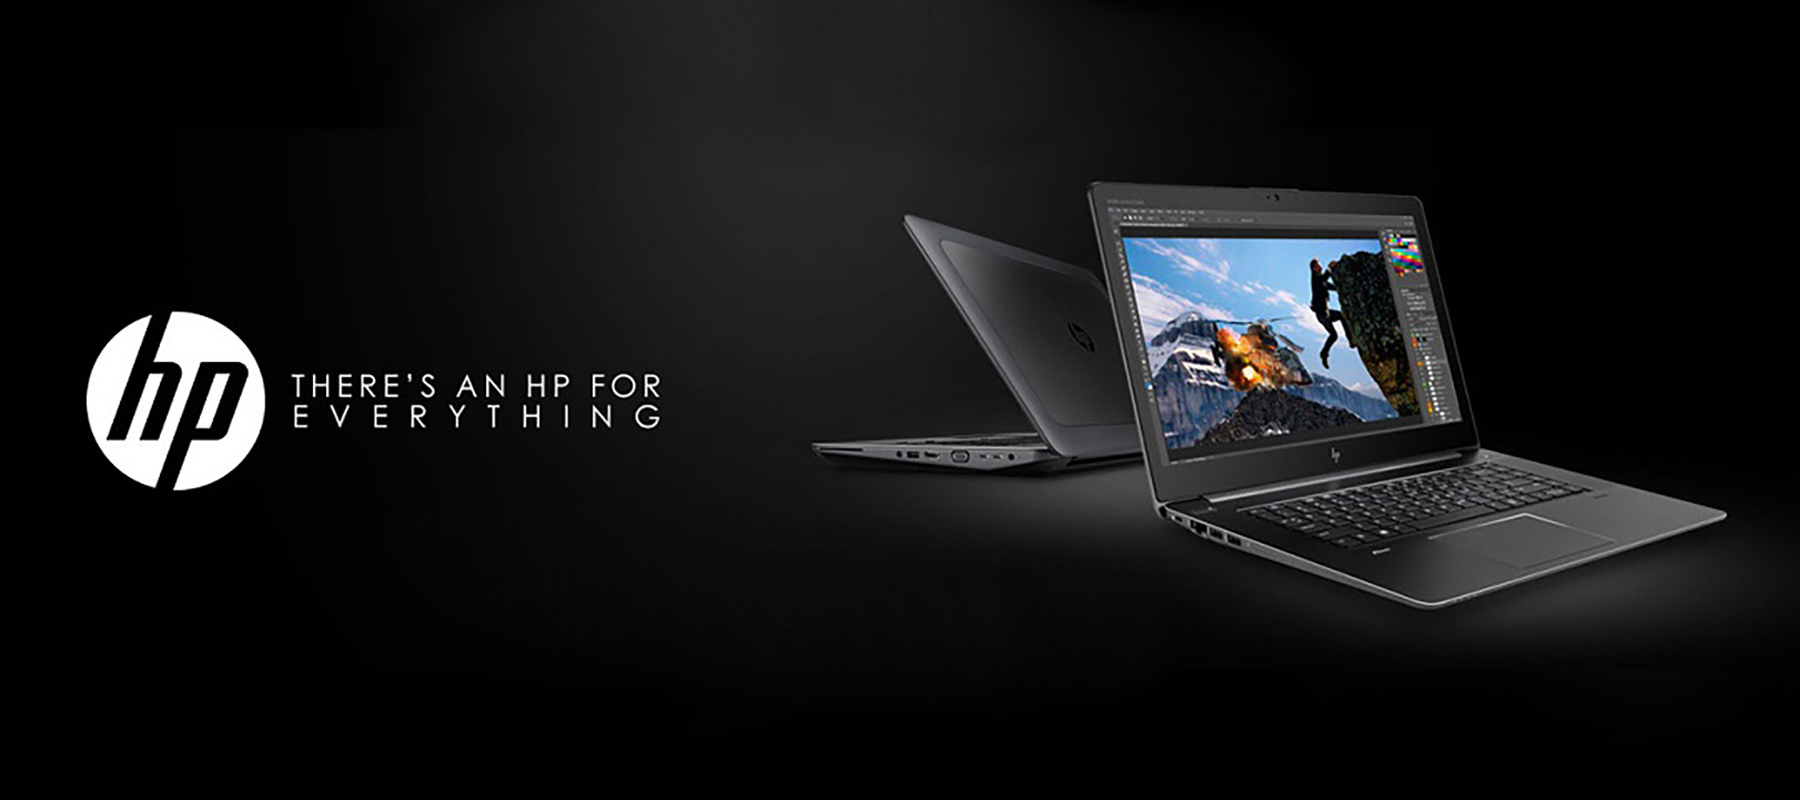 We now have brand new HP Probook 455 G9's IN STOCK!